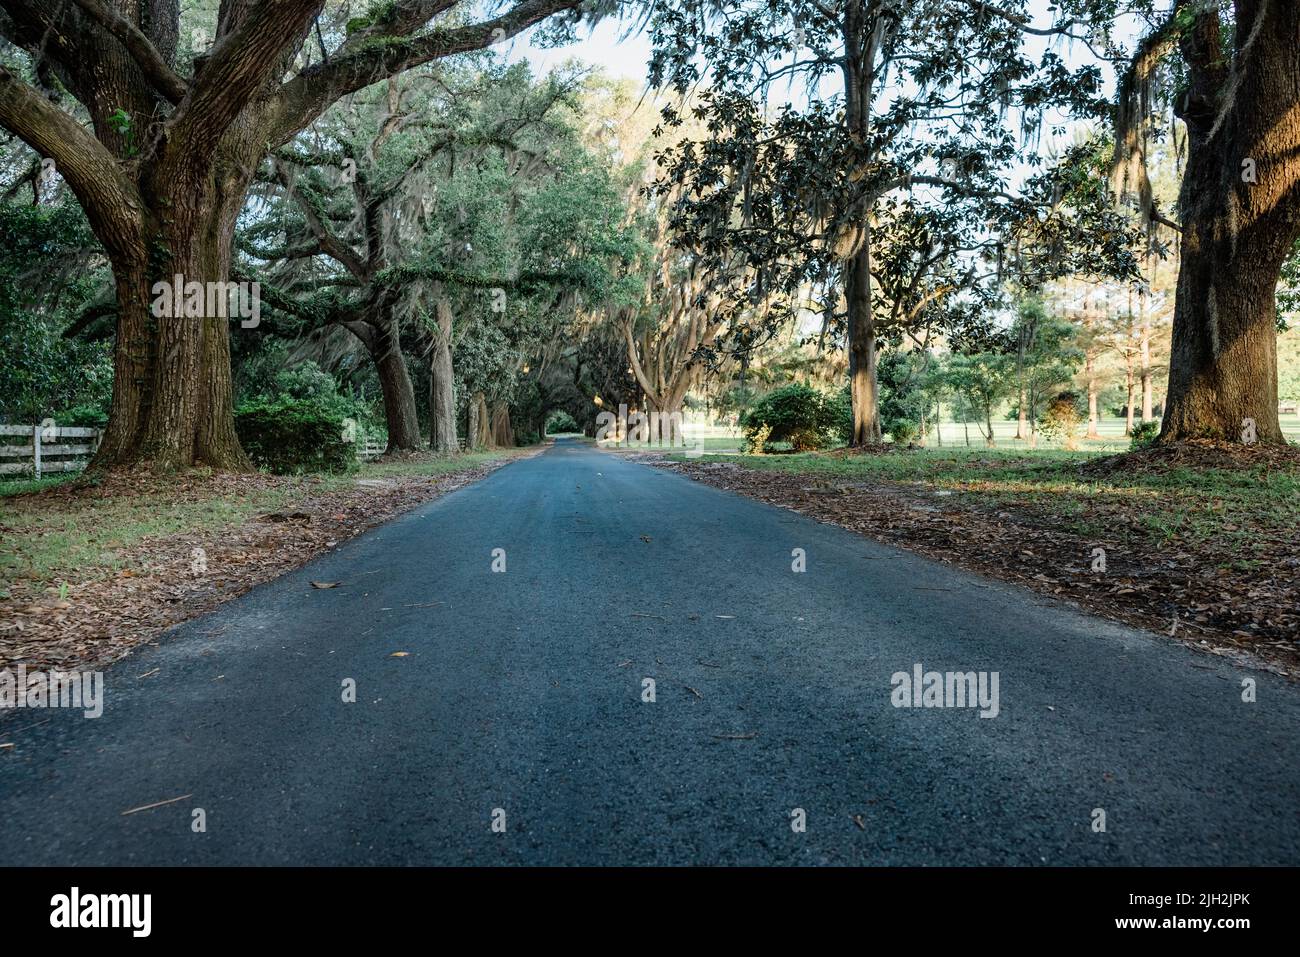 A long southern paved driveway or road with sprawling oak trees and a ...